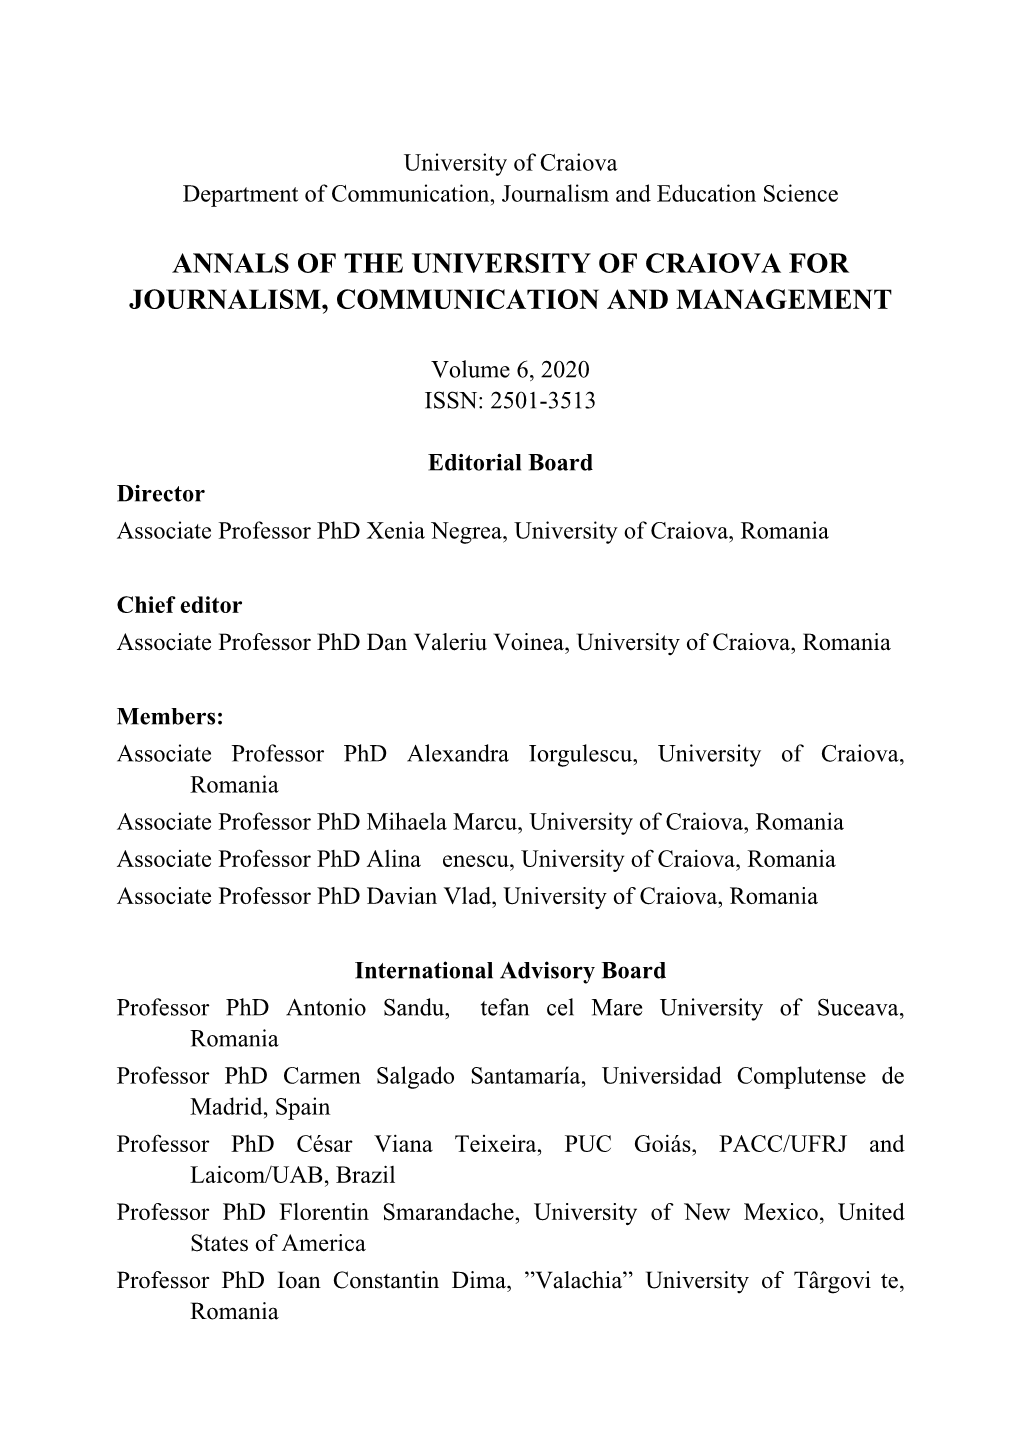 Annals of the University of Craiova for Journalism, Communication and Management